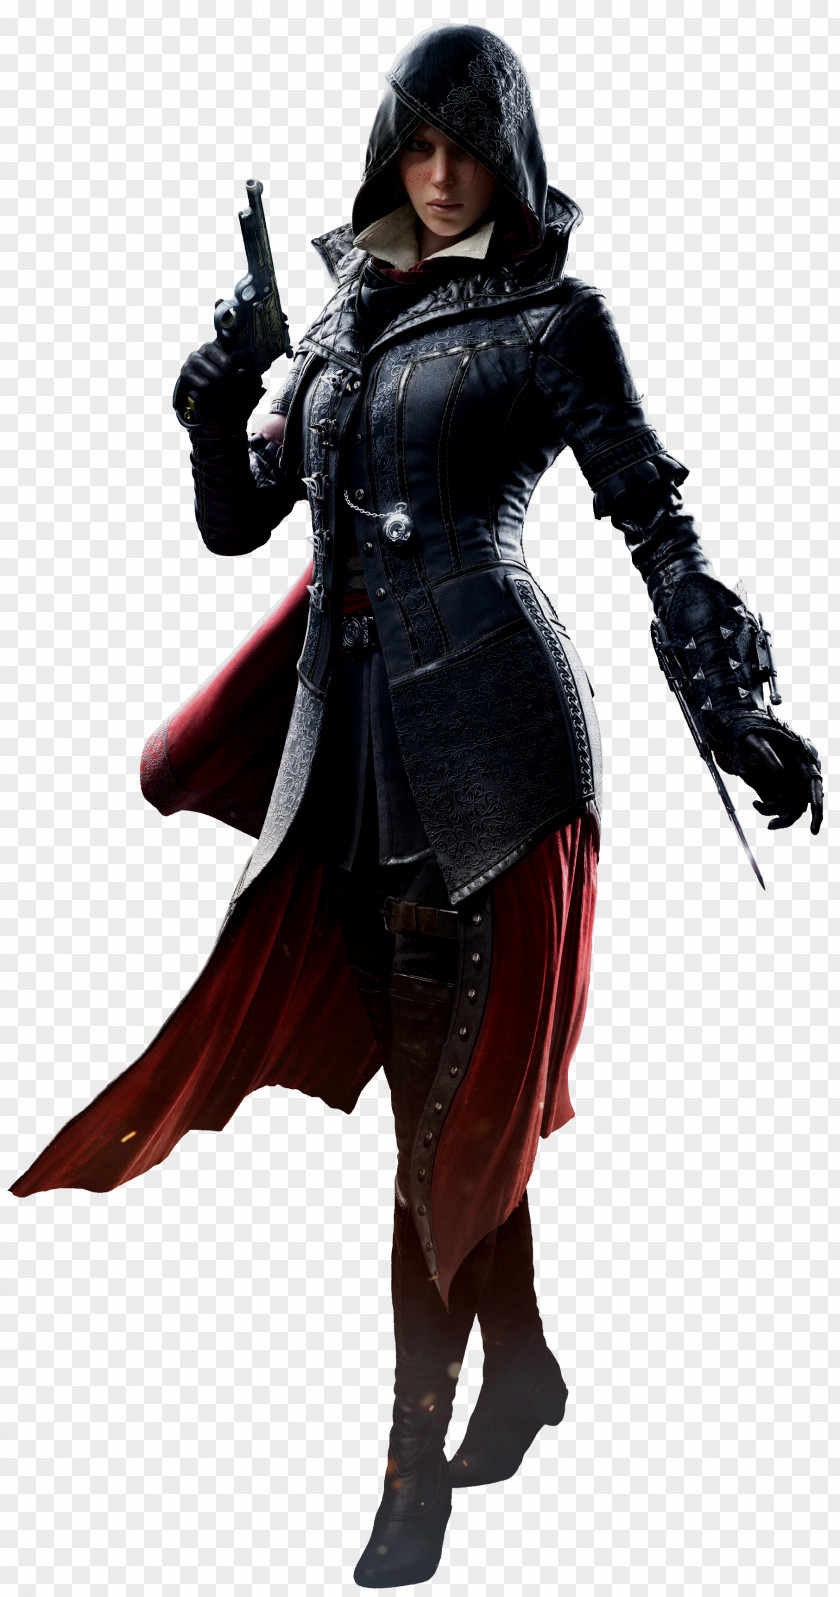 Assassin's Creed Syndicate III Creed: Brotherhood Video Game PNG